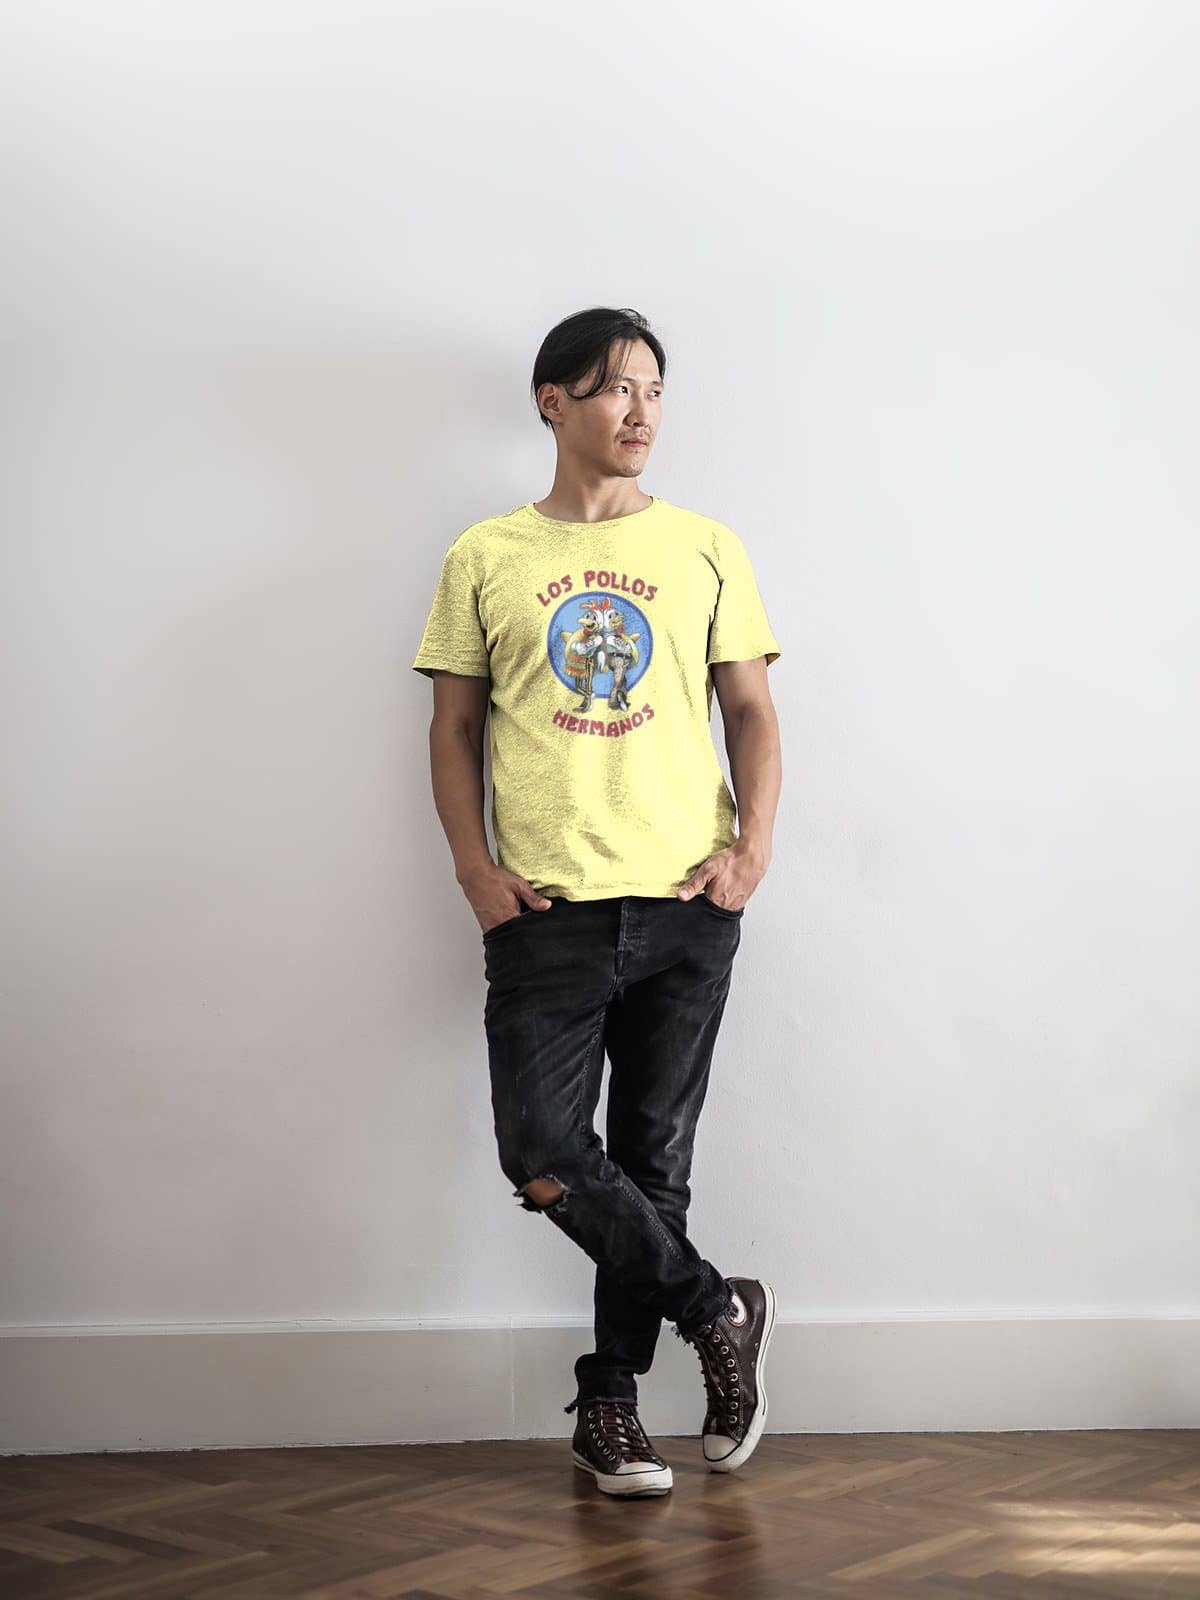 Los Pollos Hermanos Exclusive Yellow T Shirt for Men and Women | Premium Design | Catch My Drift India - Catch My Drift India  better call saul, clothing, general, hollywood, jimmy, made in i